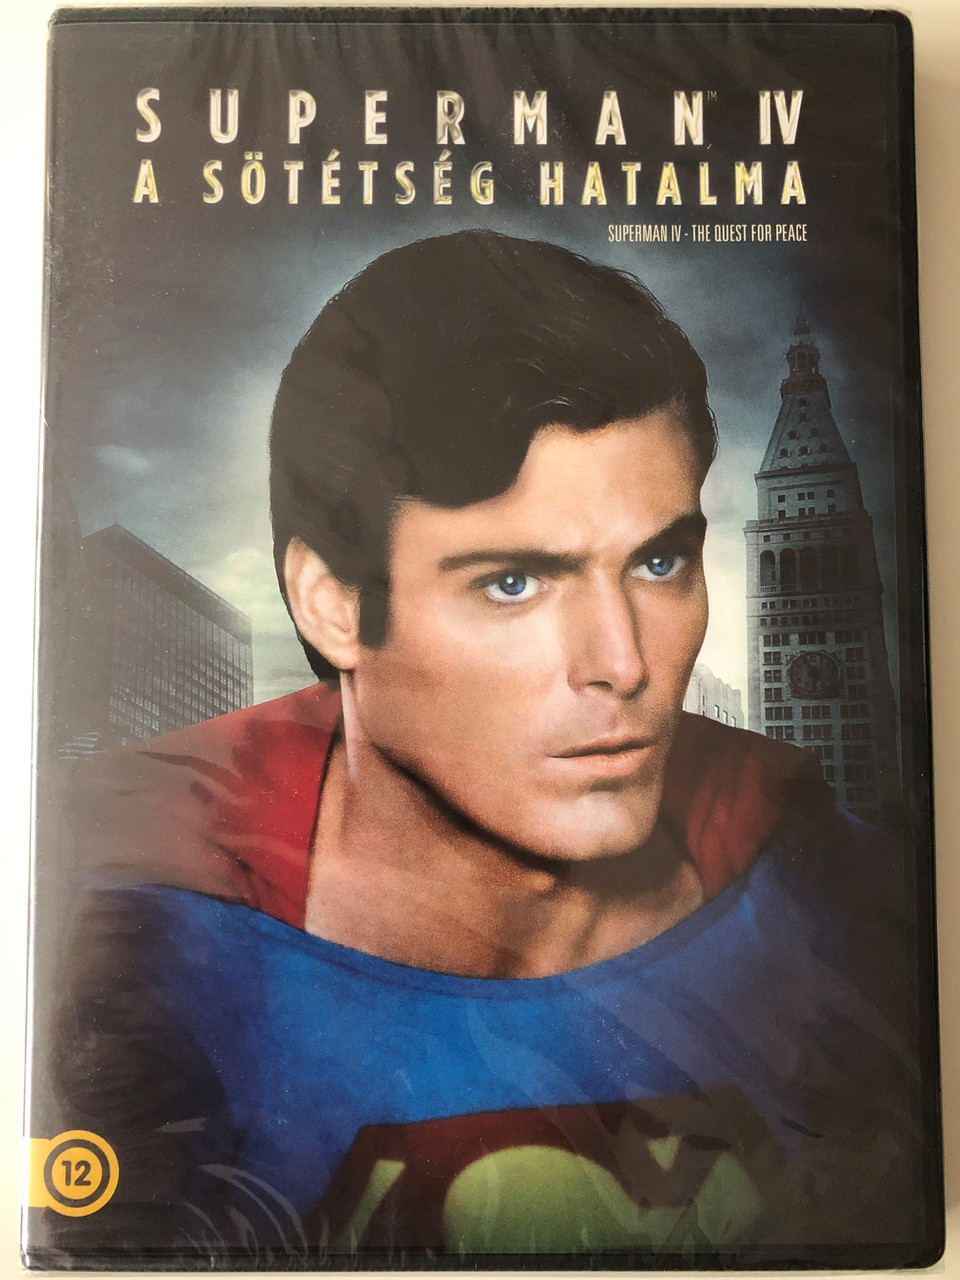 Superman IV - The Quest for Peace DVD Superman 4 A sötétség Hatalma /  Directed by Sidney J. Furie / Starring: Christopher Reeve, Gene Hackman,  Jackie Cooper, Marc McClure - bibleinmylanguage